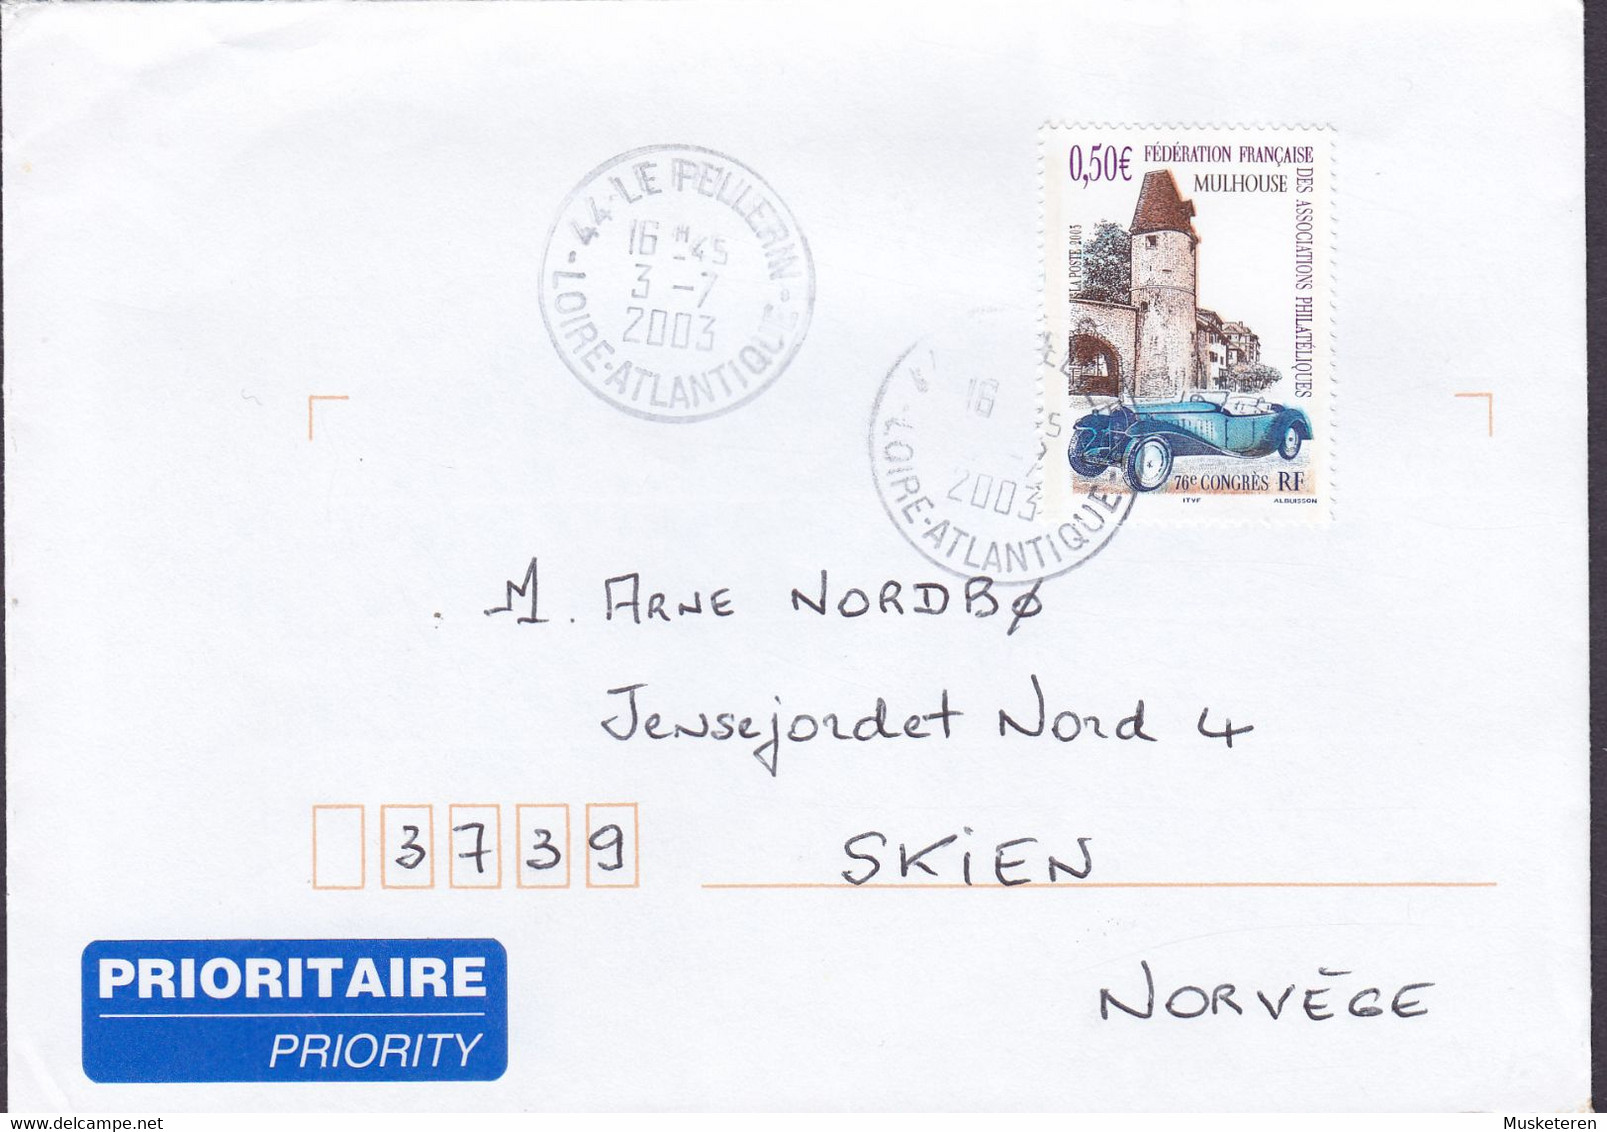 France PRIORITAIRE Label LE PELLERIN Lore-Atlantique 2003 Cover Lettre SKIEN Norway ERROR Variety Misplaced Colour !! - Covers & Documents